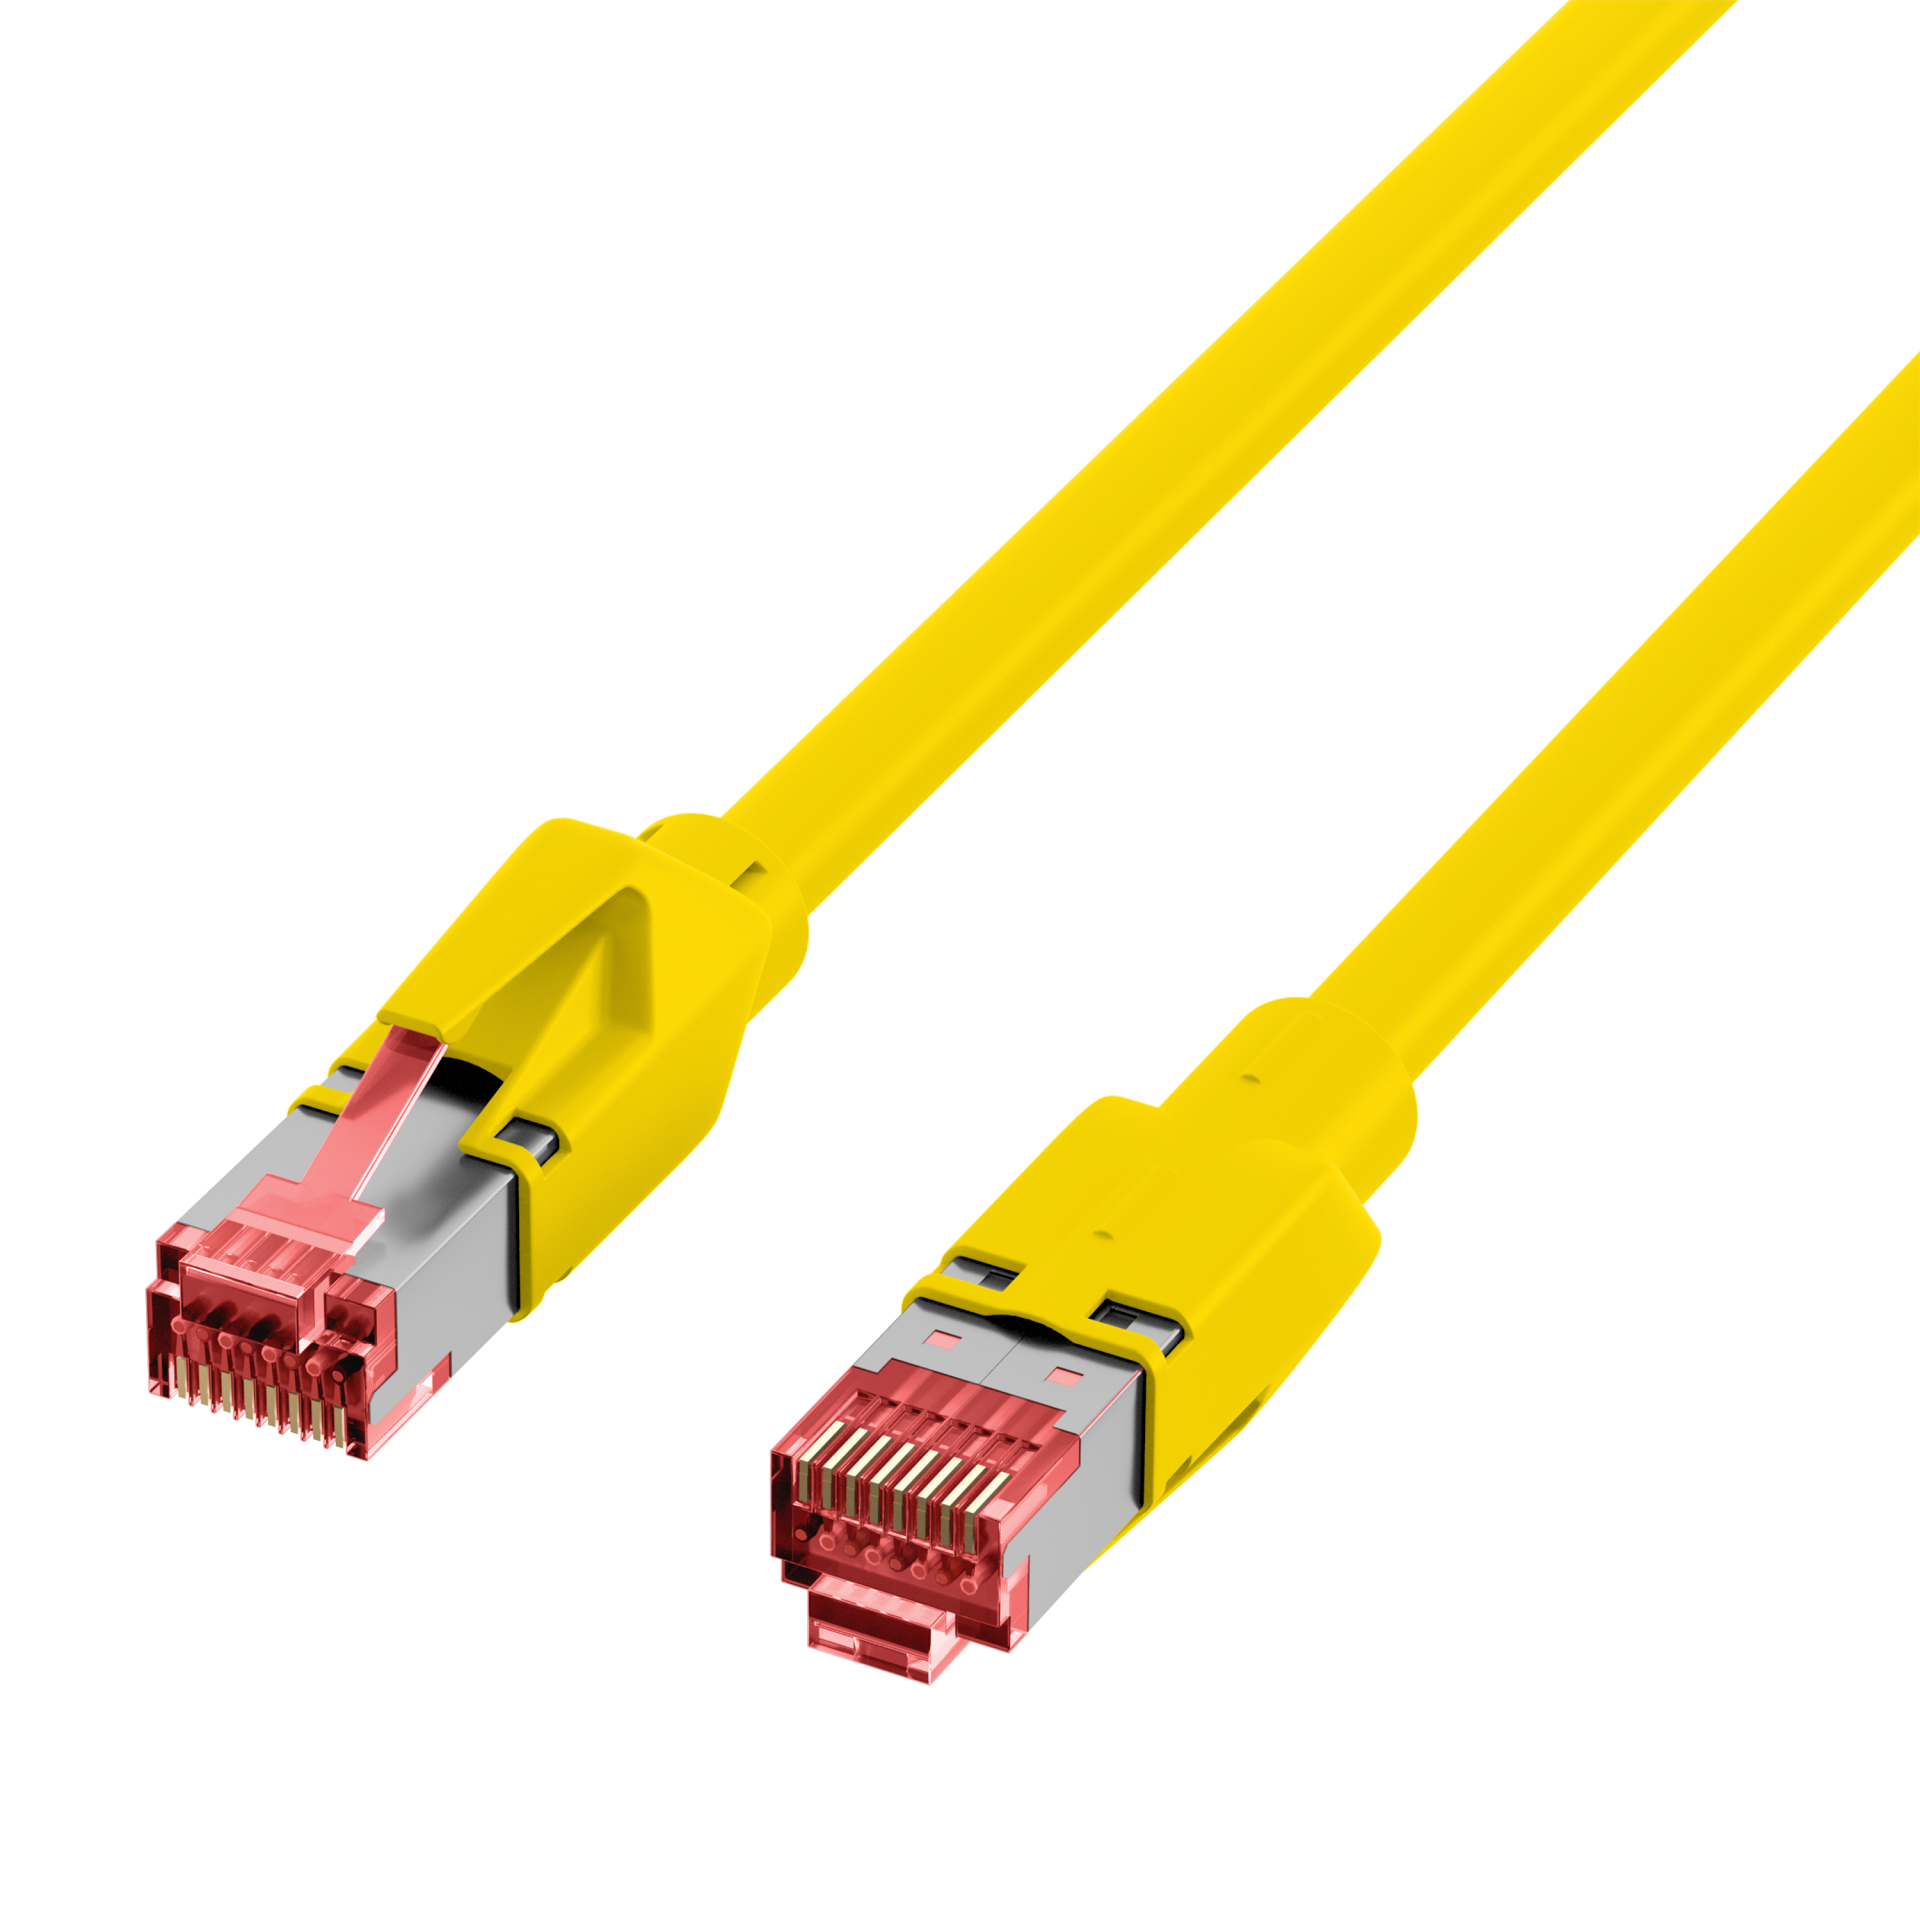 RJ45 Patch Cord Cat.5e SF/UTP PURTM21 for drag chains yellow 7,5m